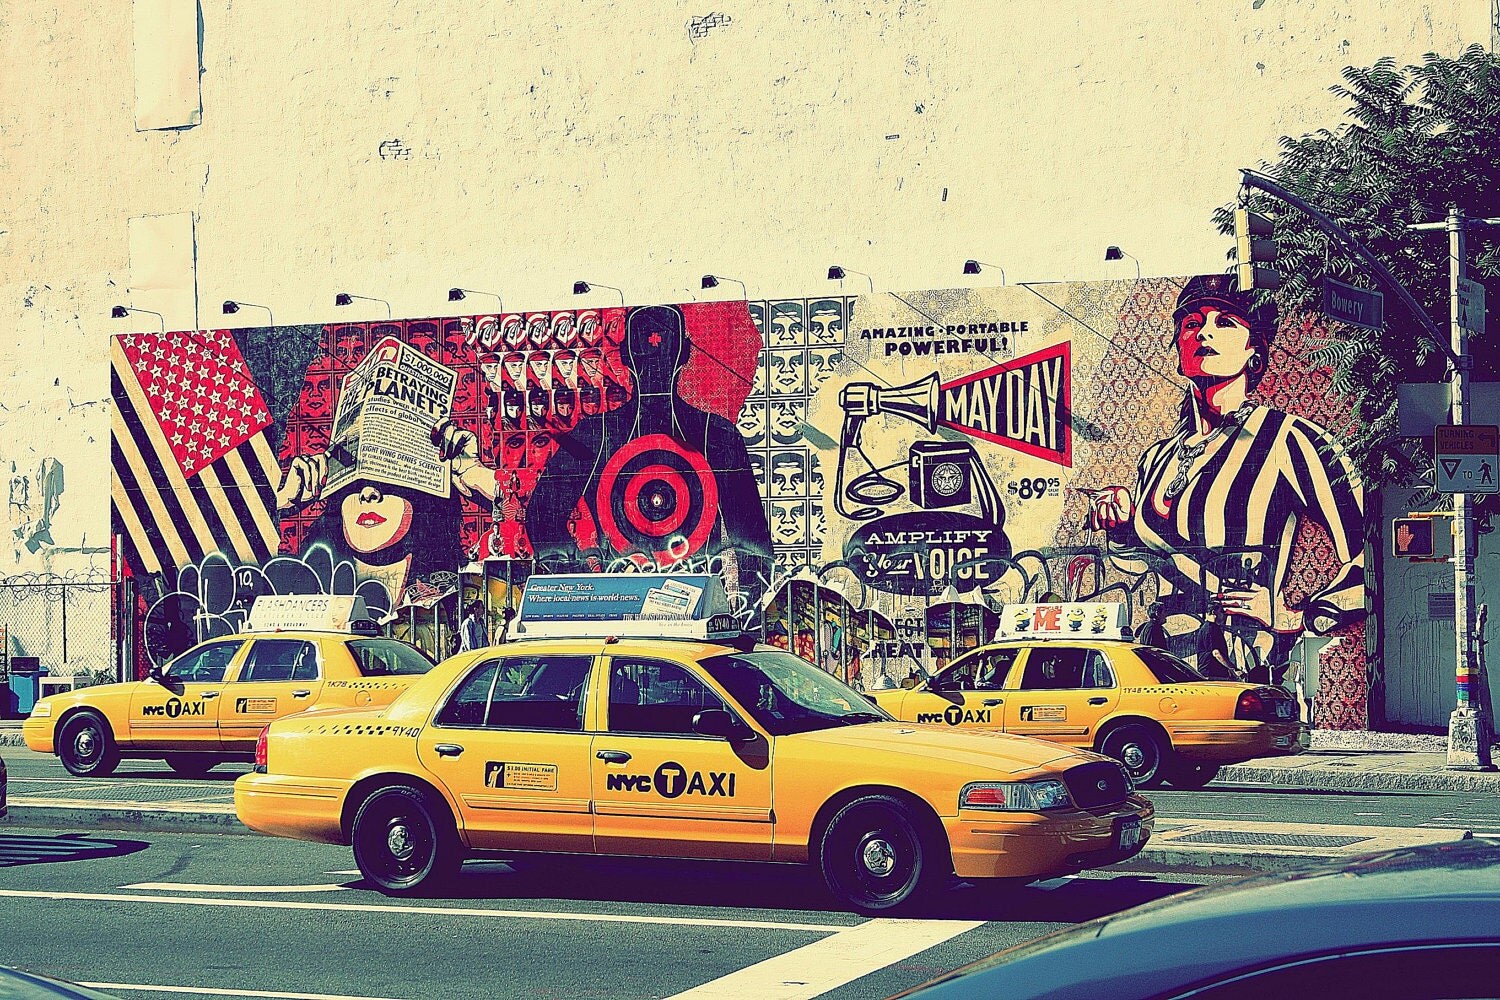 Obey New York